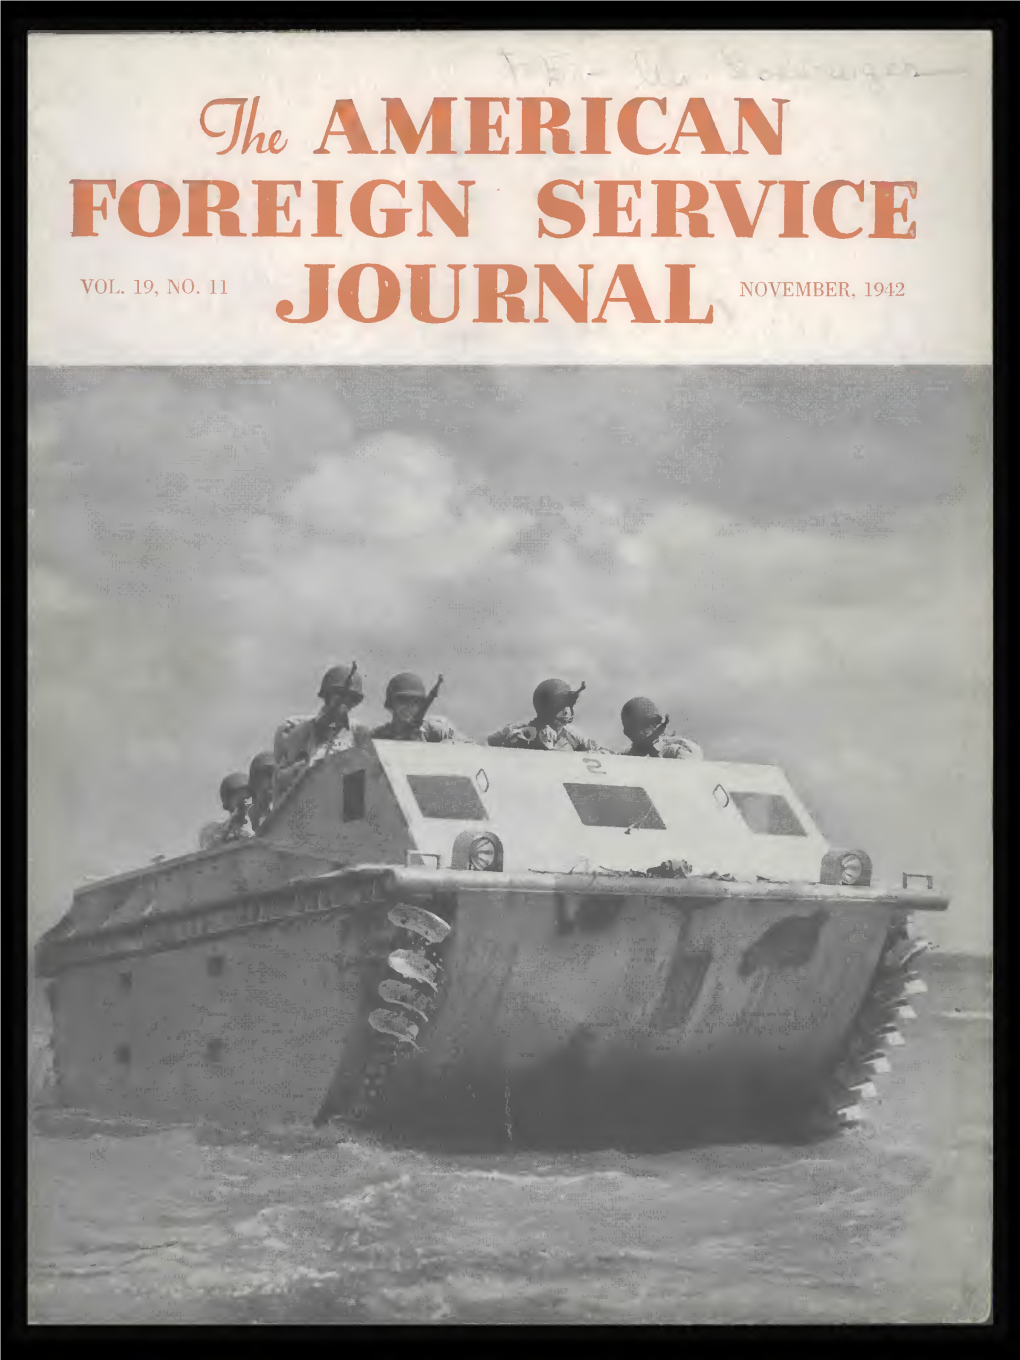 The Foreign Service Journal, November 1942